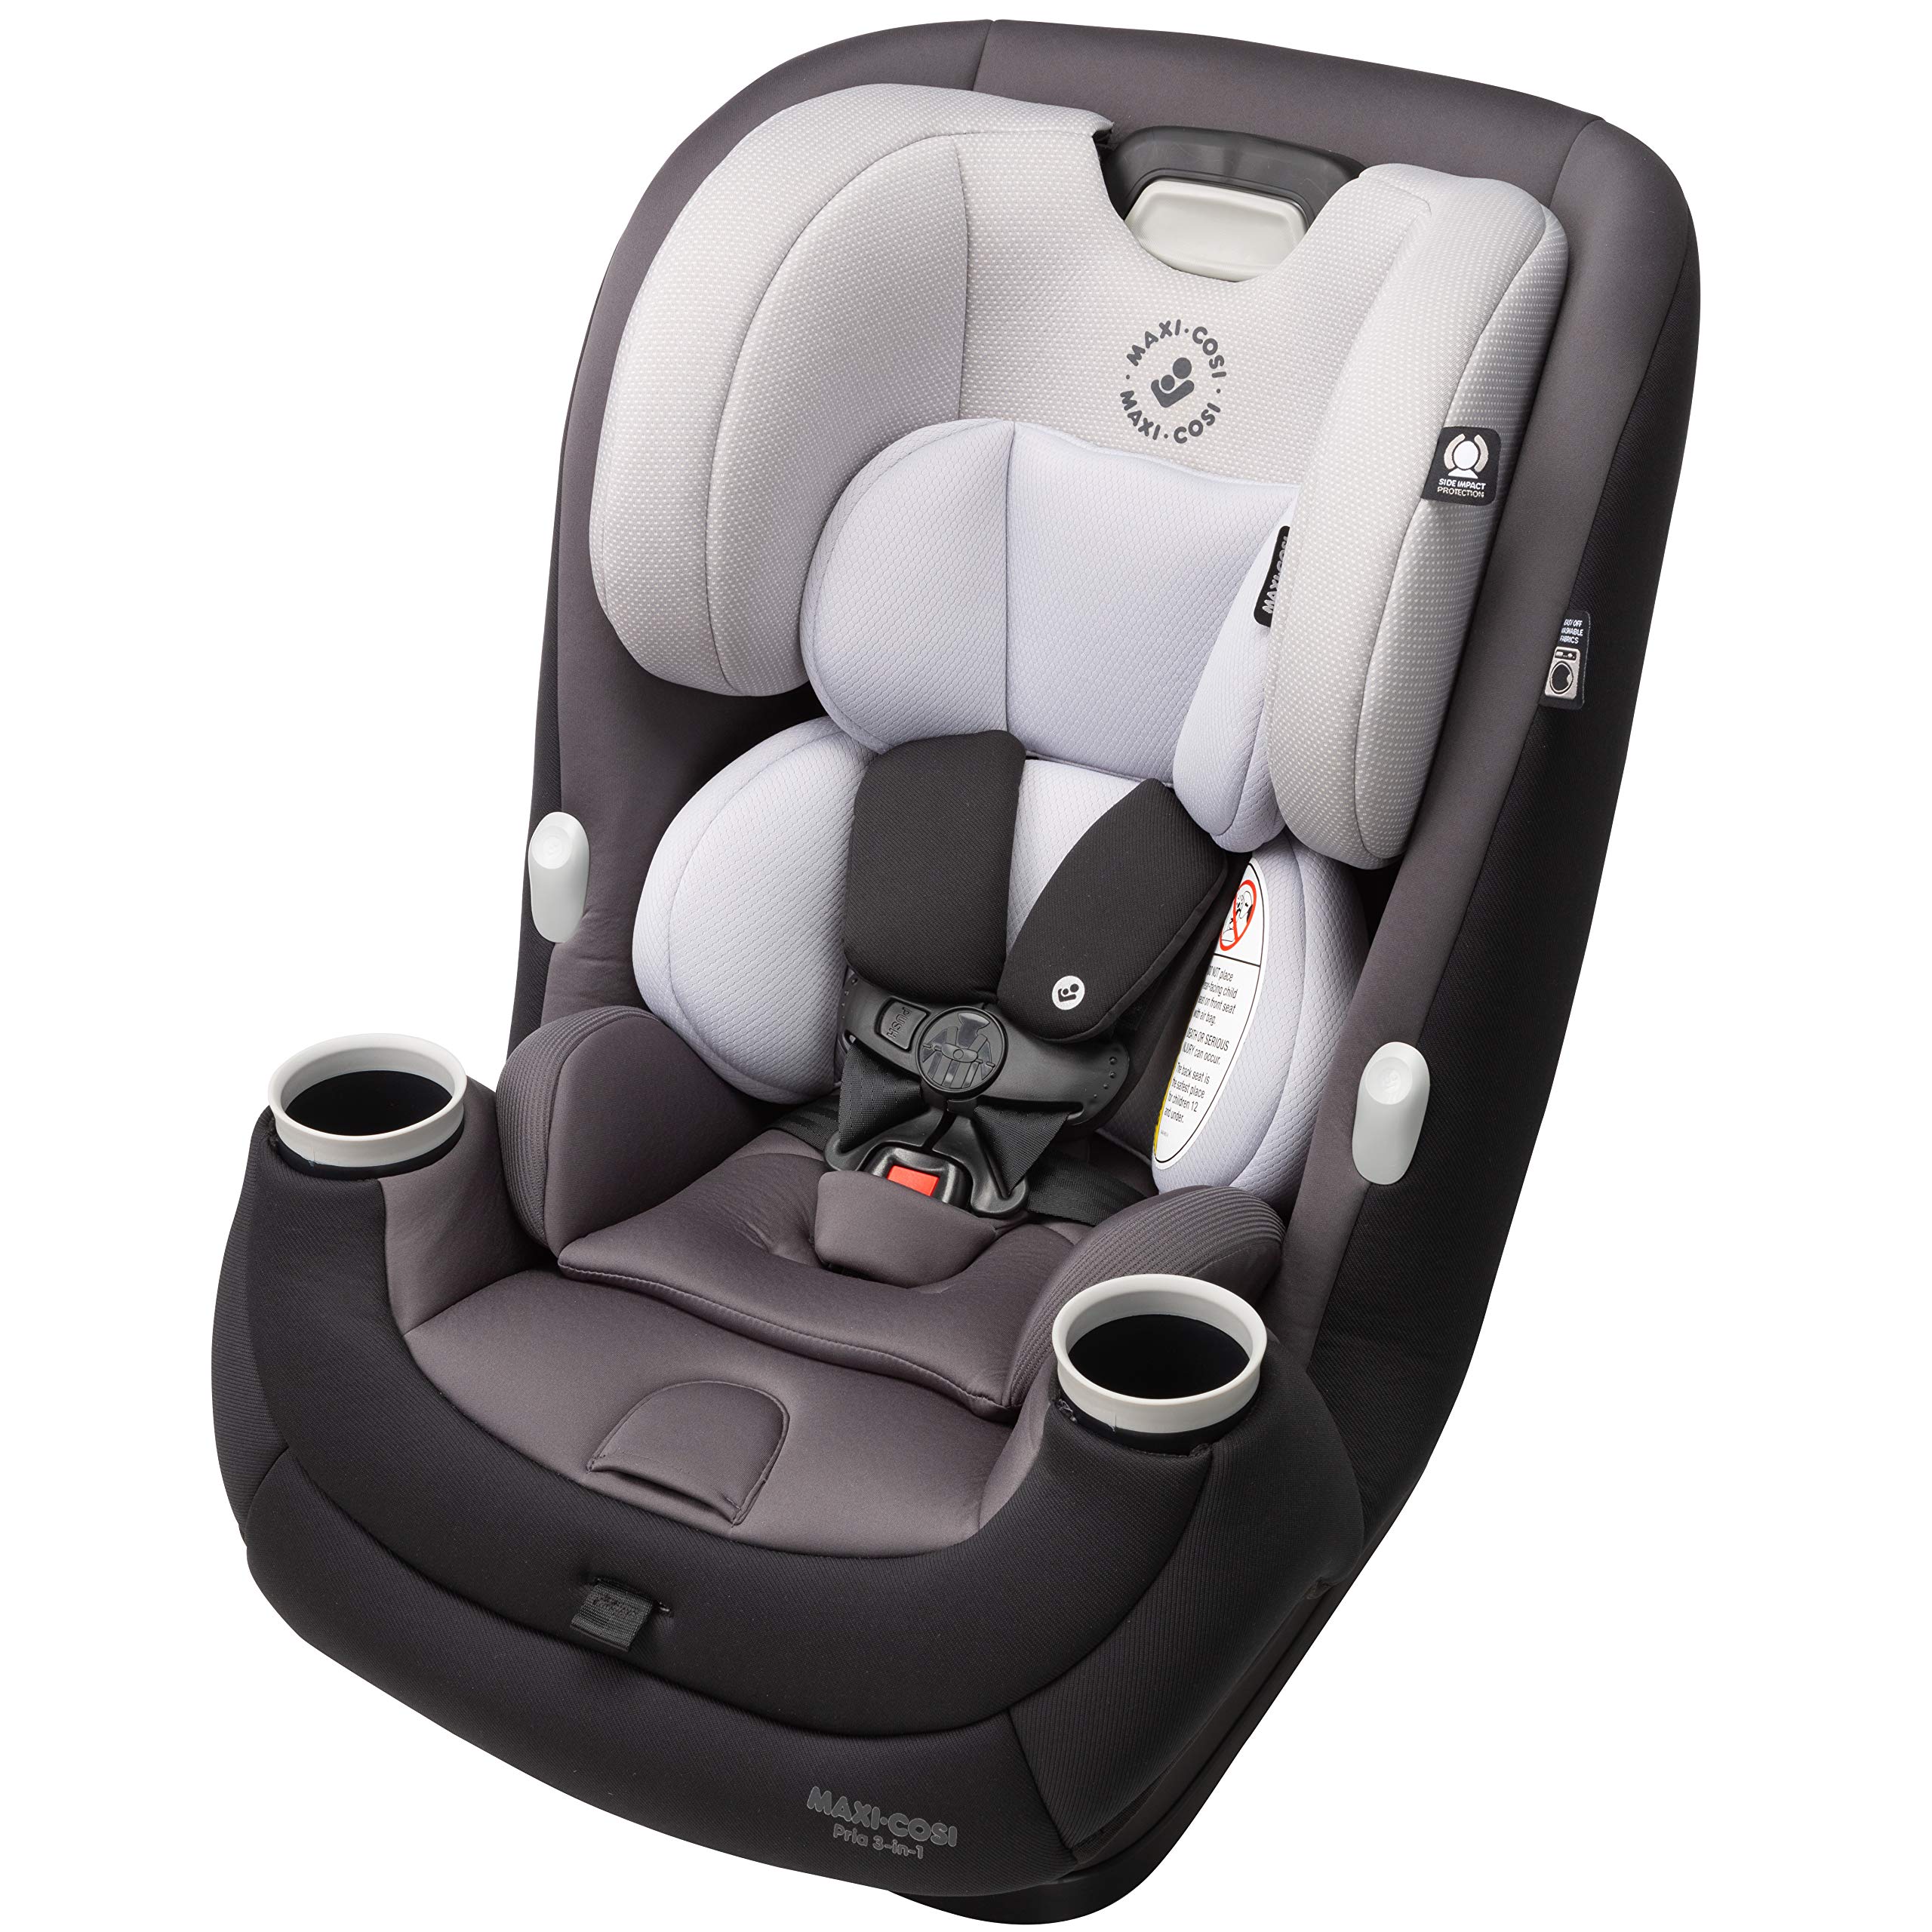 Maxi-Cosi Pria All-in-One Convertible Car Seat, rear-facing, from 4-40 pounds; forward-facing to 65 pounds; and up to 100 pounds in booster mode, Blackened Pearl